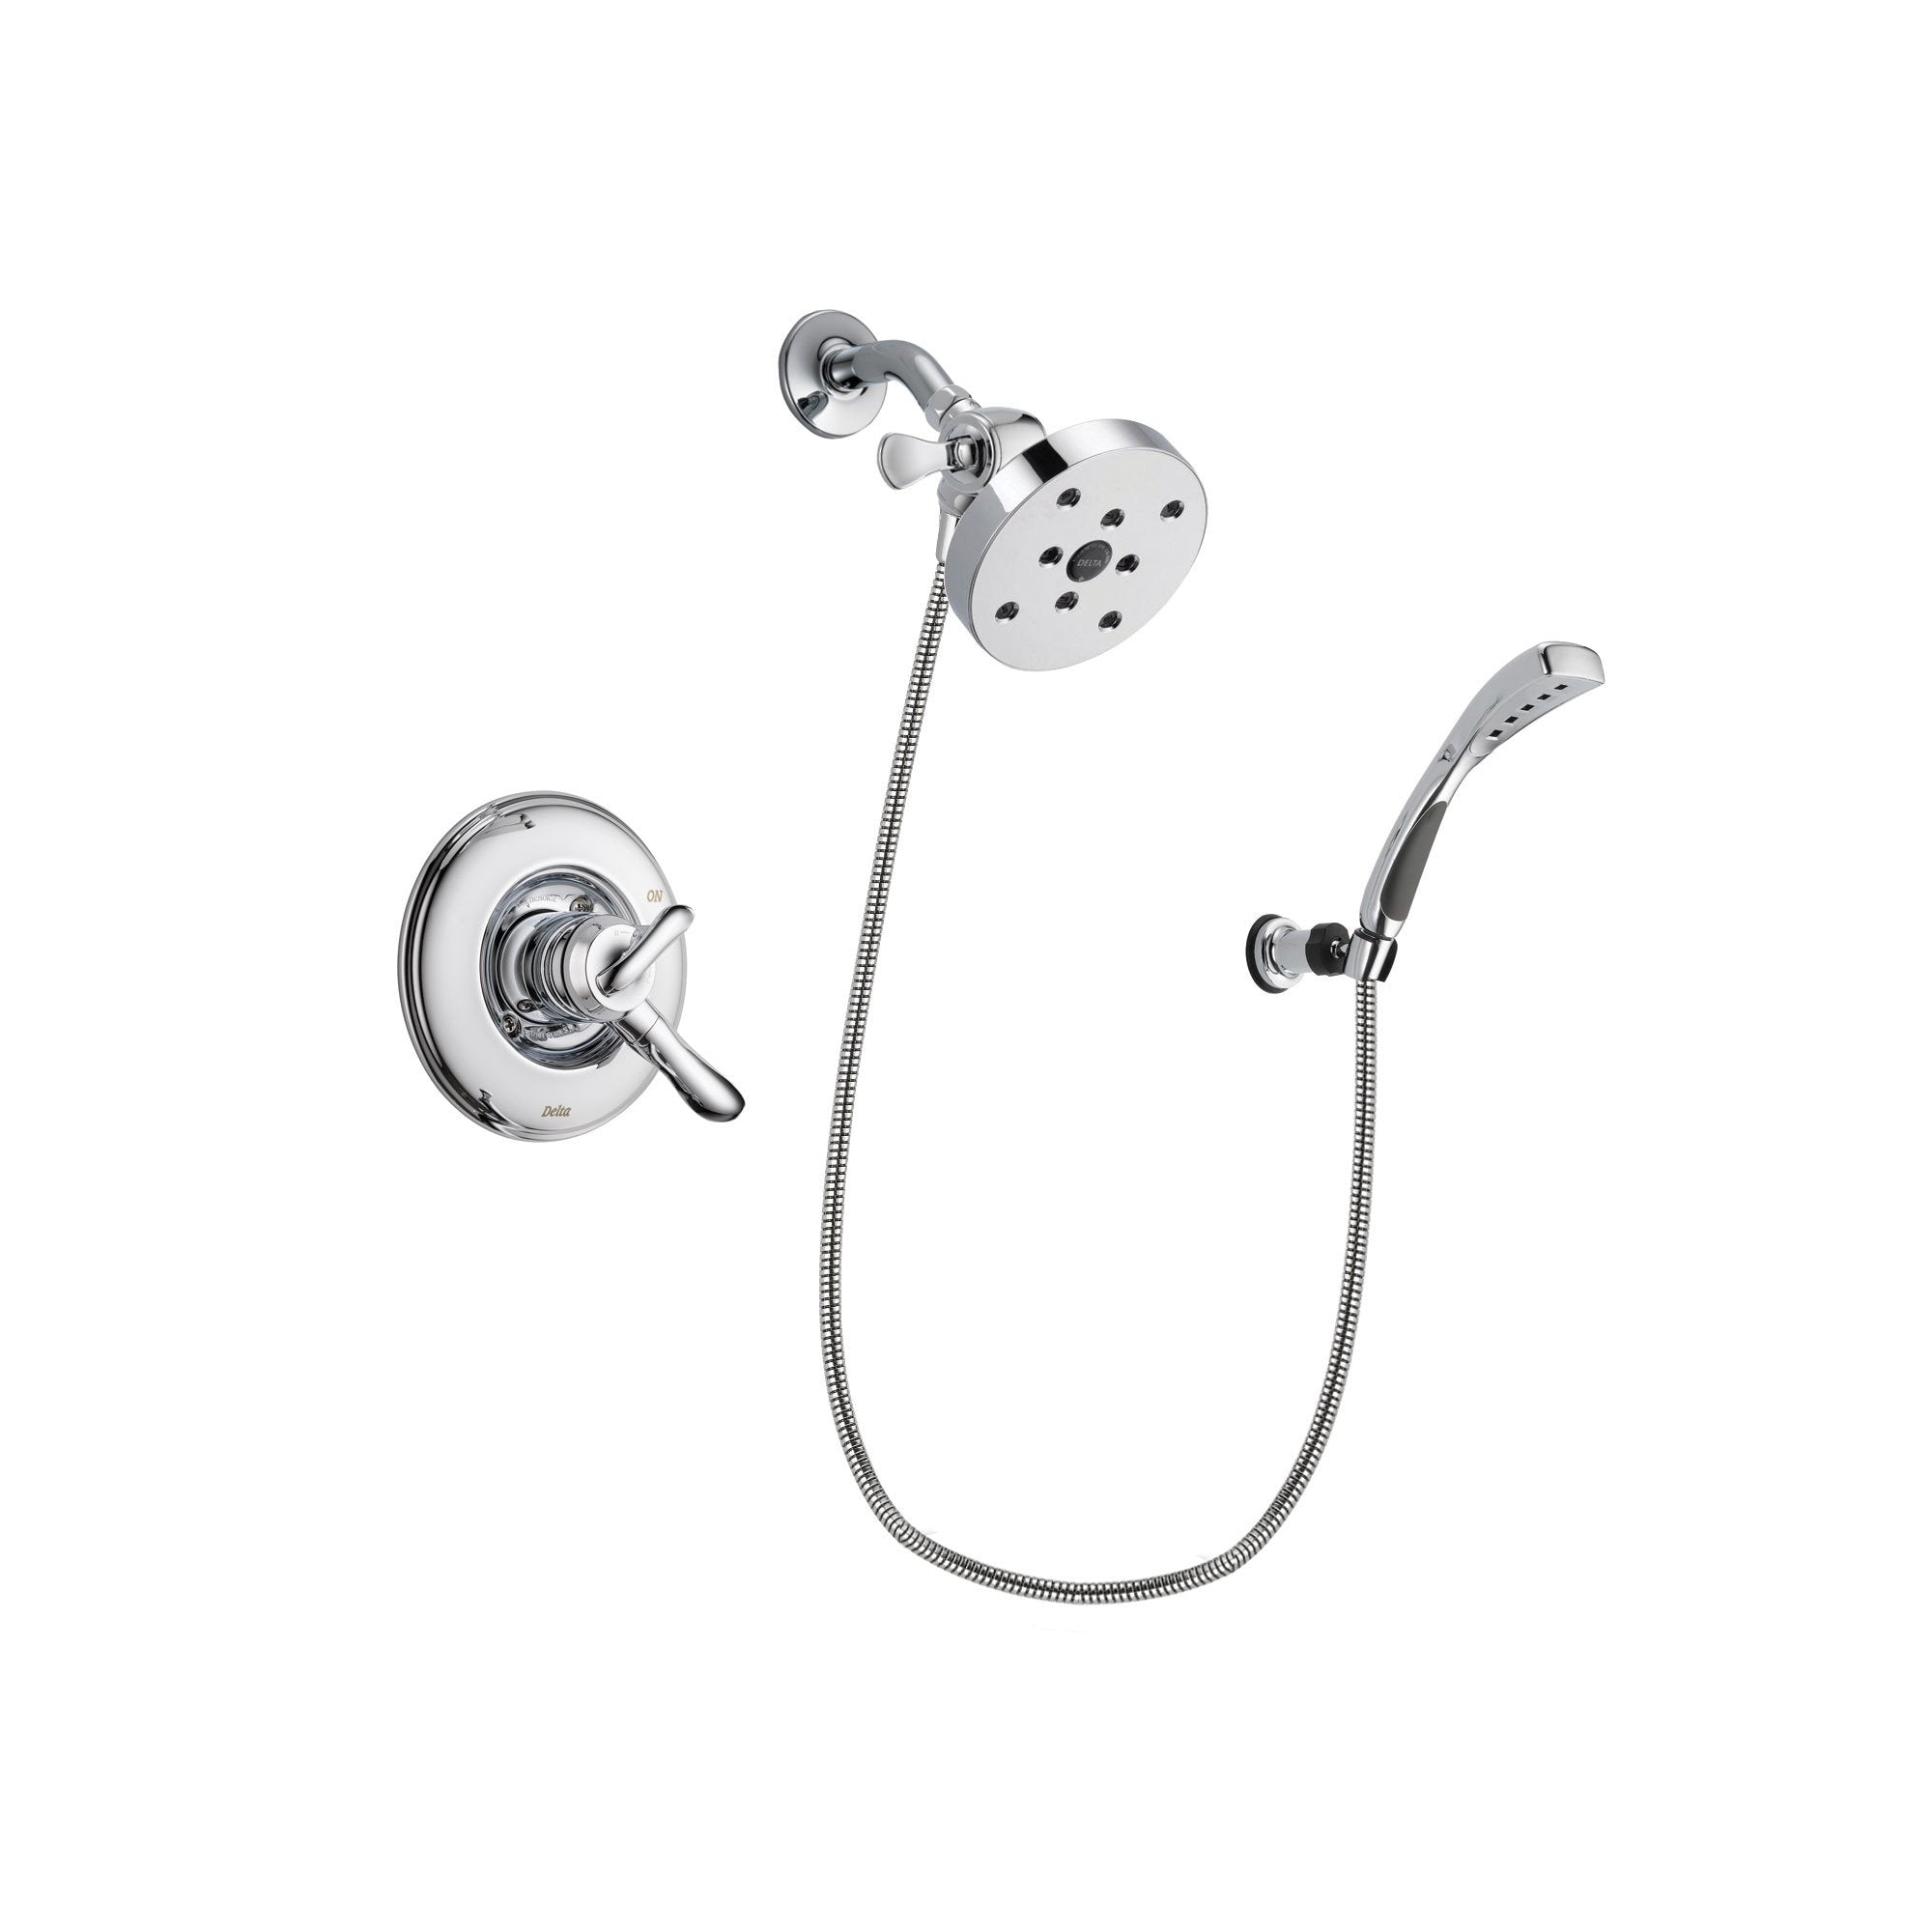 Delta Linden Chrome Finish Dual Control Shower Faucet System Package with 5-1/2 inch Shower Head and Wall-Mount Bracket with Handheld Shower Spray Includes Rough-in Valve DSP1102V